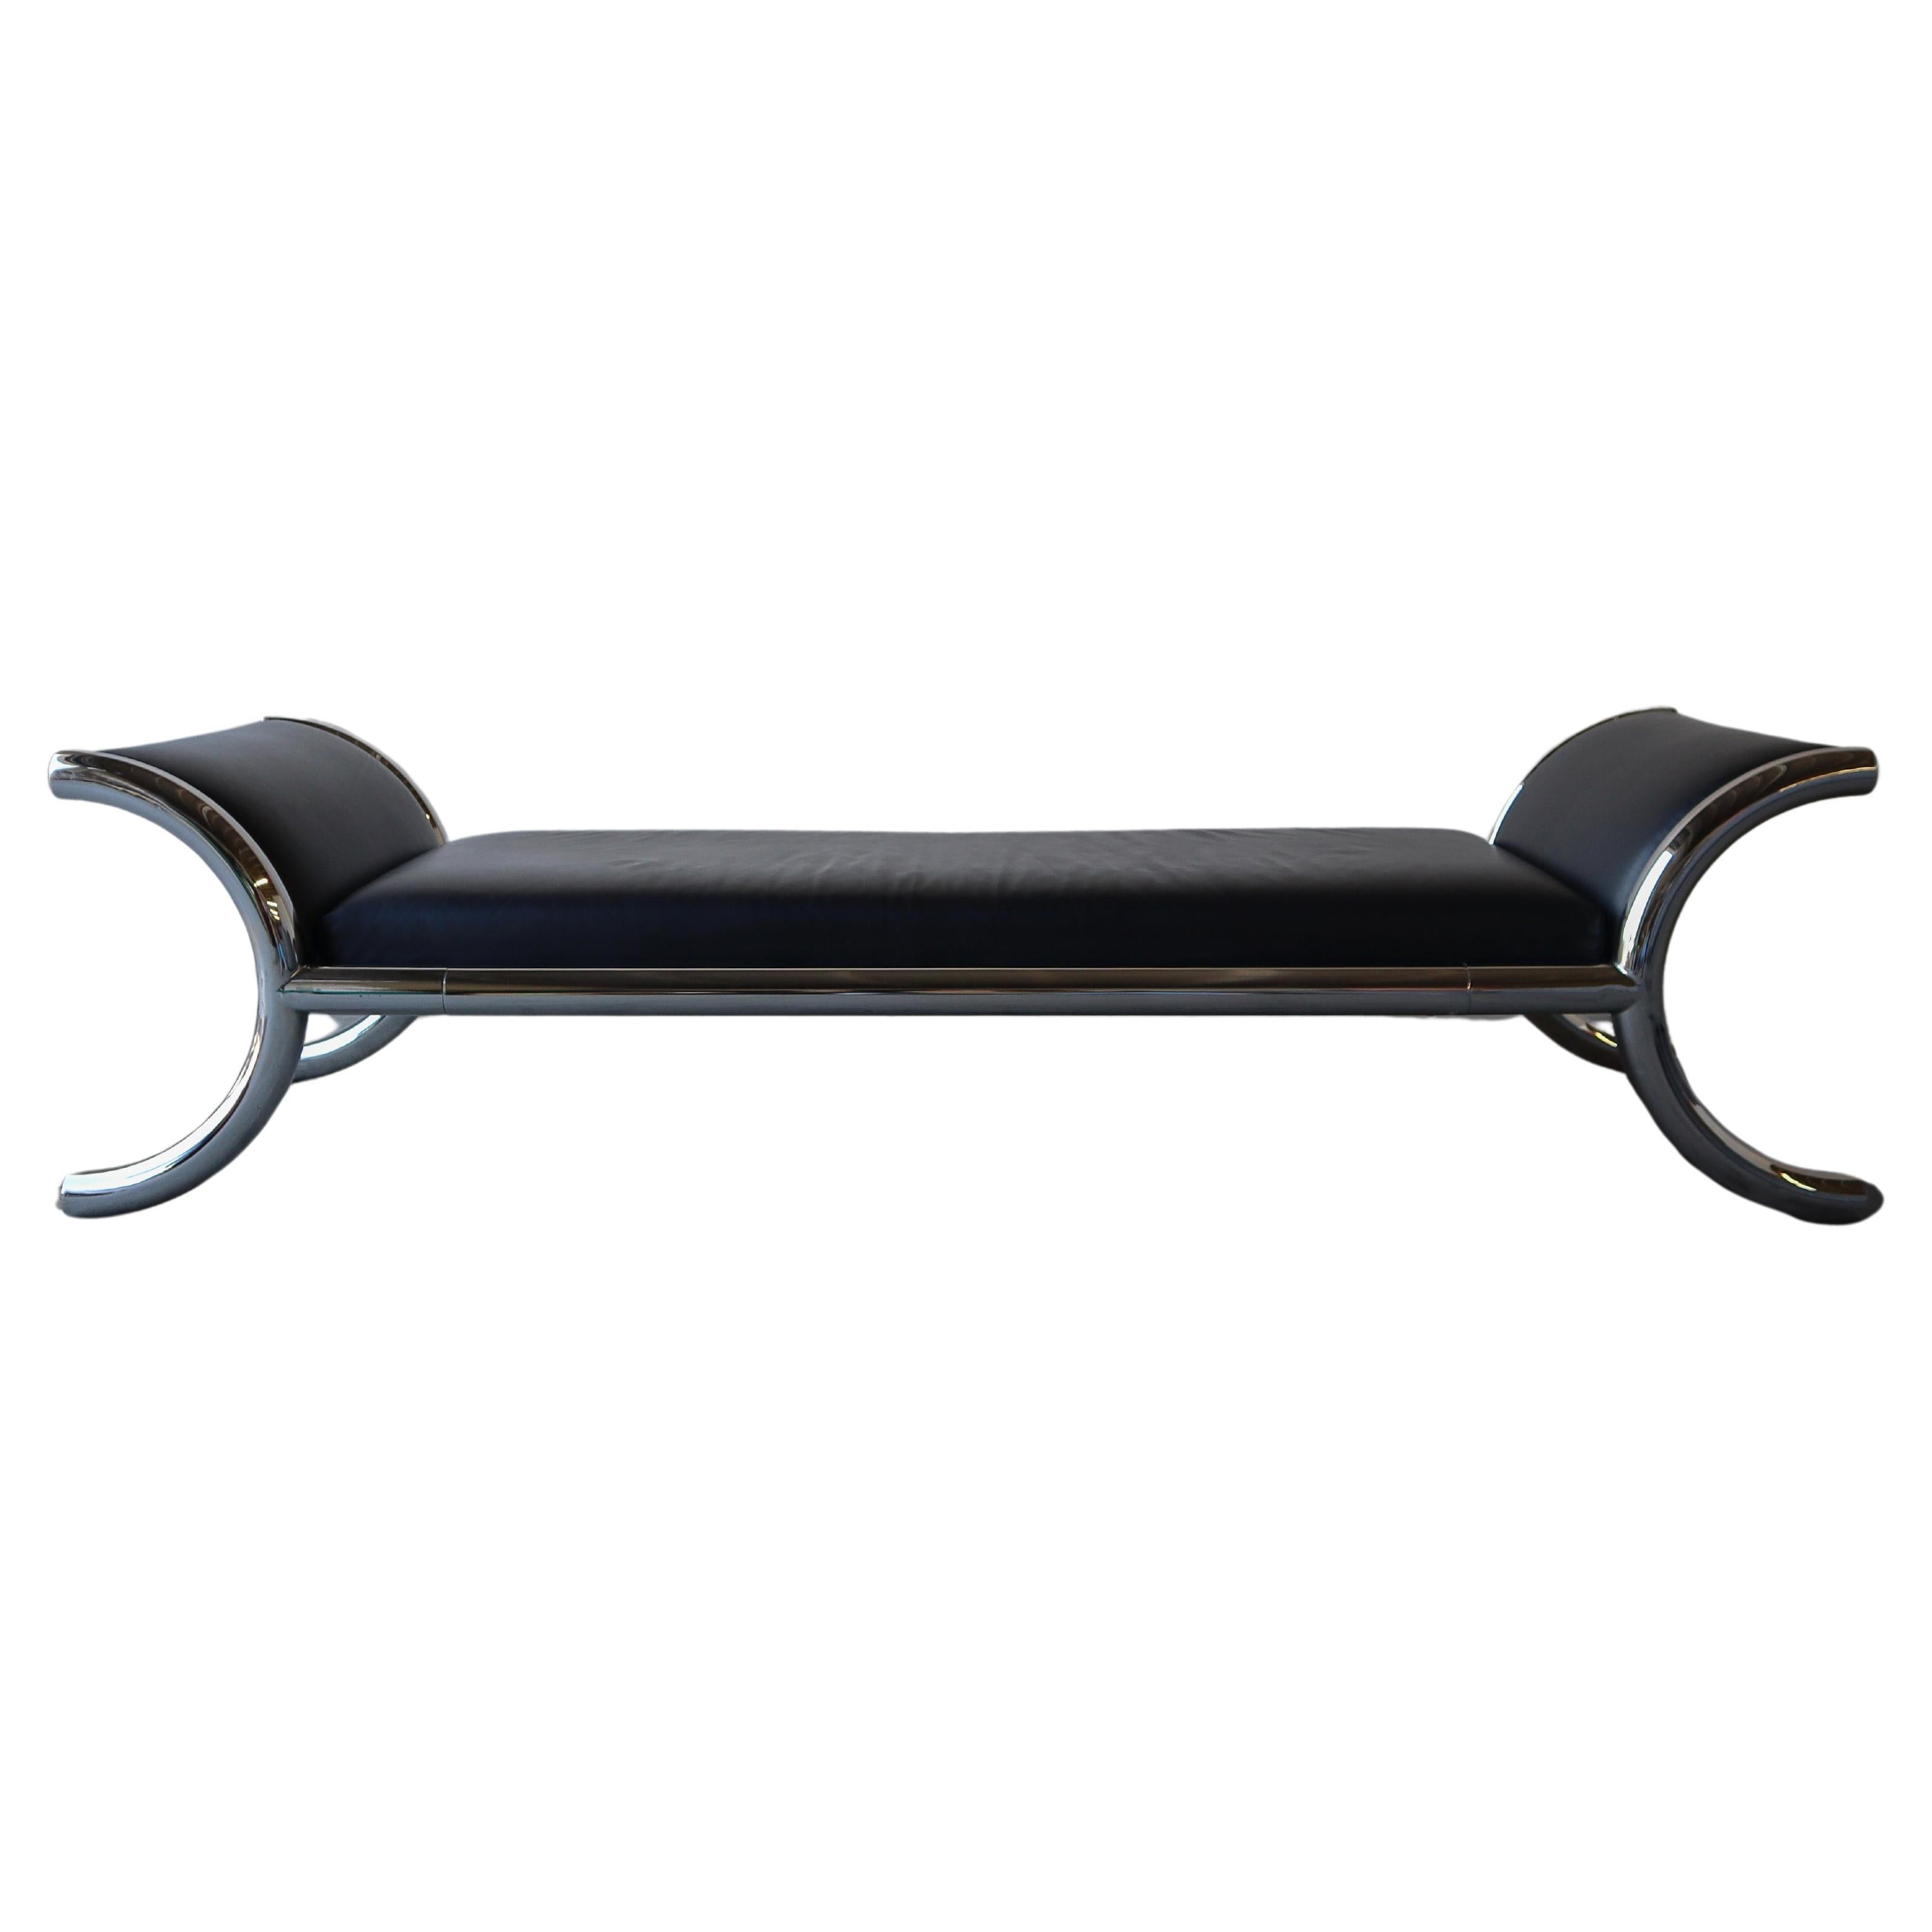 1970s Black Leather and Chrome Steel Daybed Bench For Sale